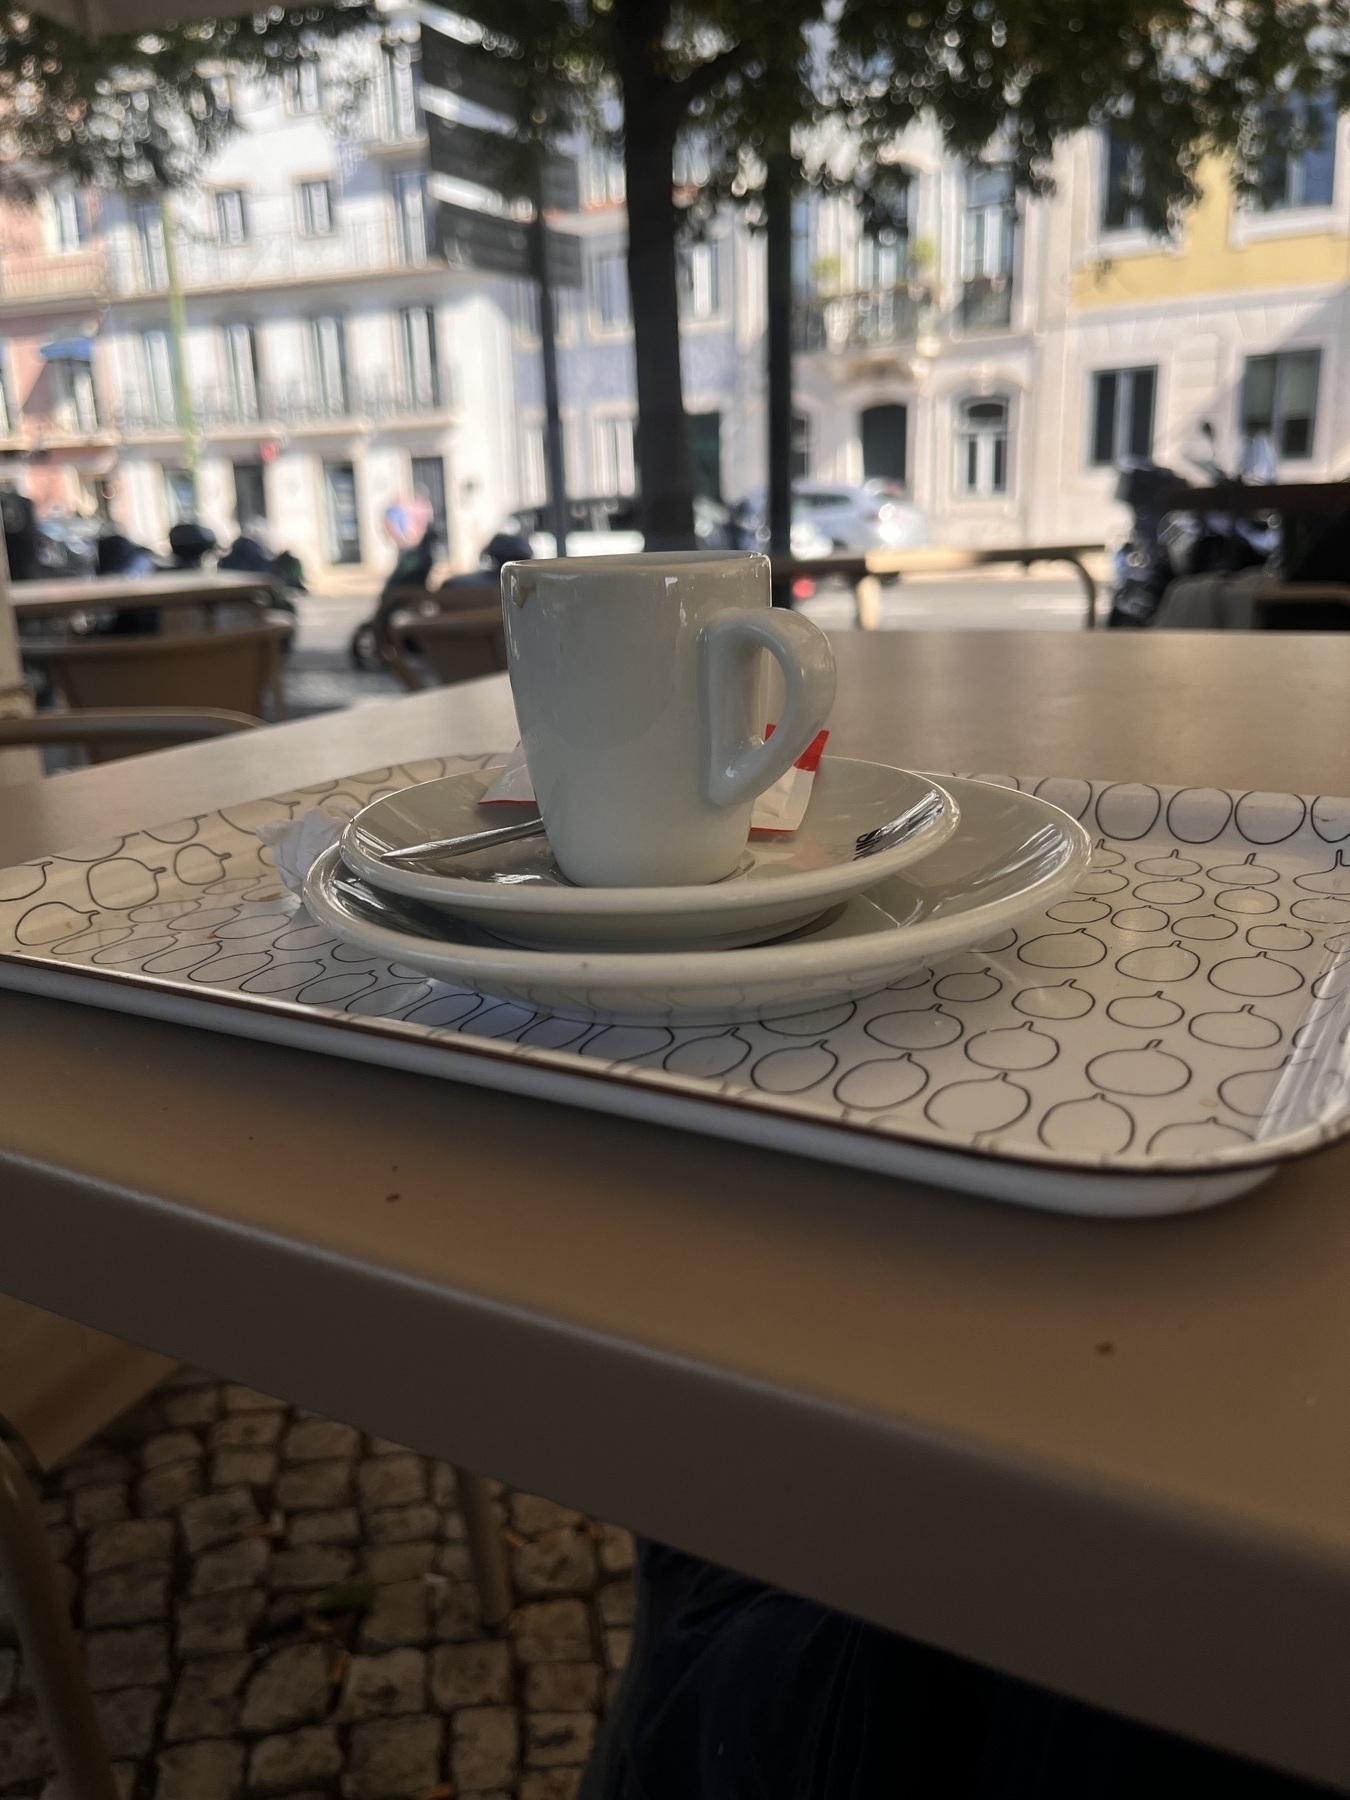 Espresso cup and empty plate sitting on a tray on a table outside, a busy street behind